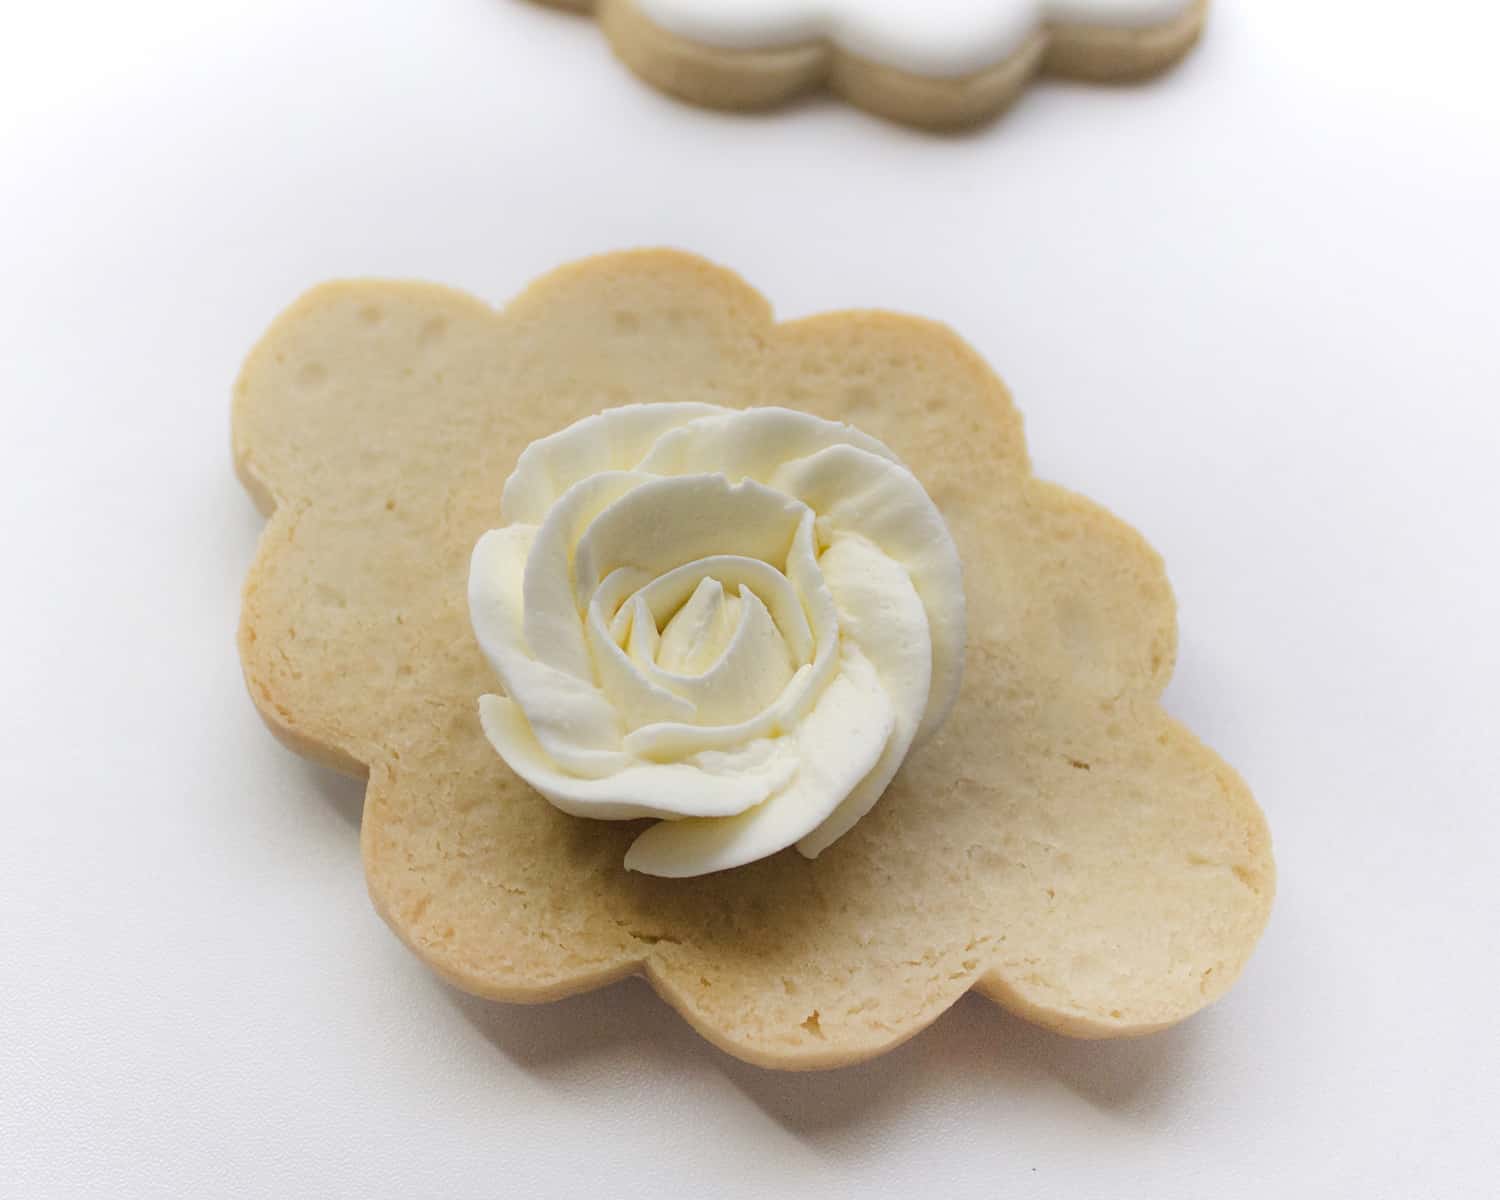 Make a flower shape with icing on a cookie